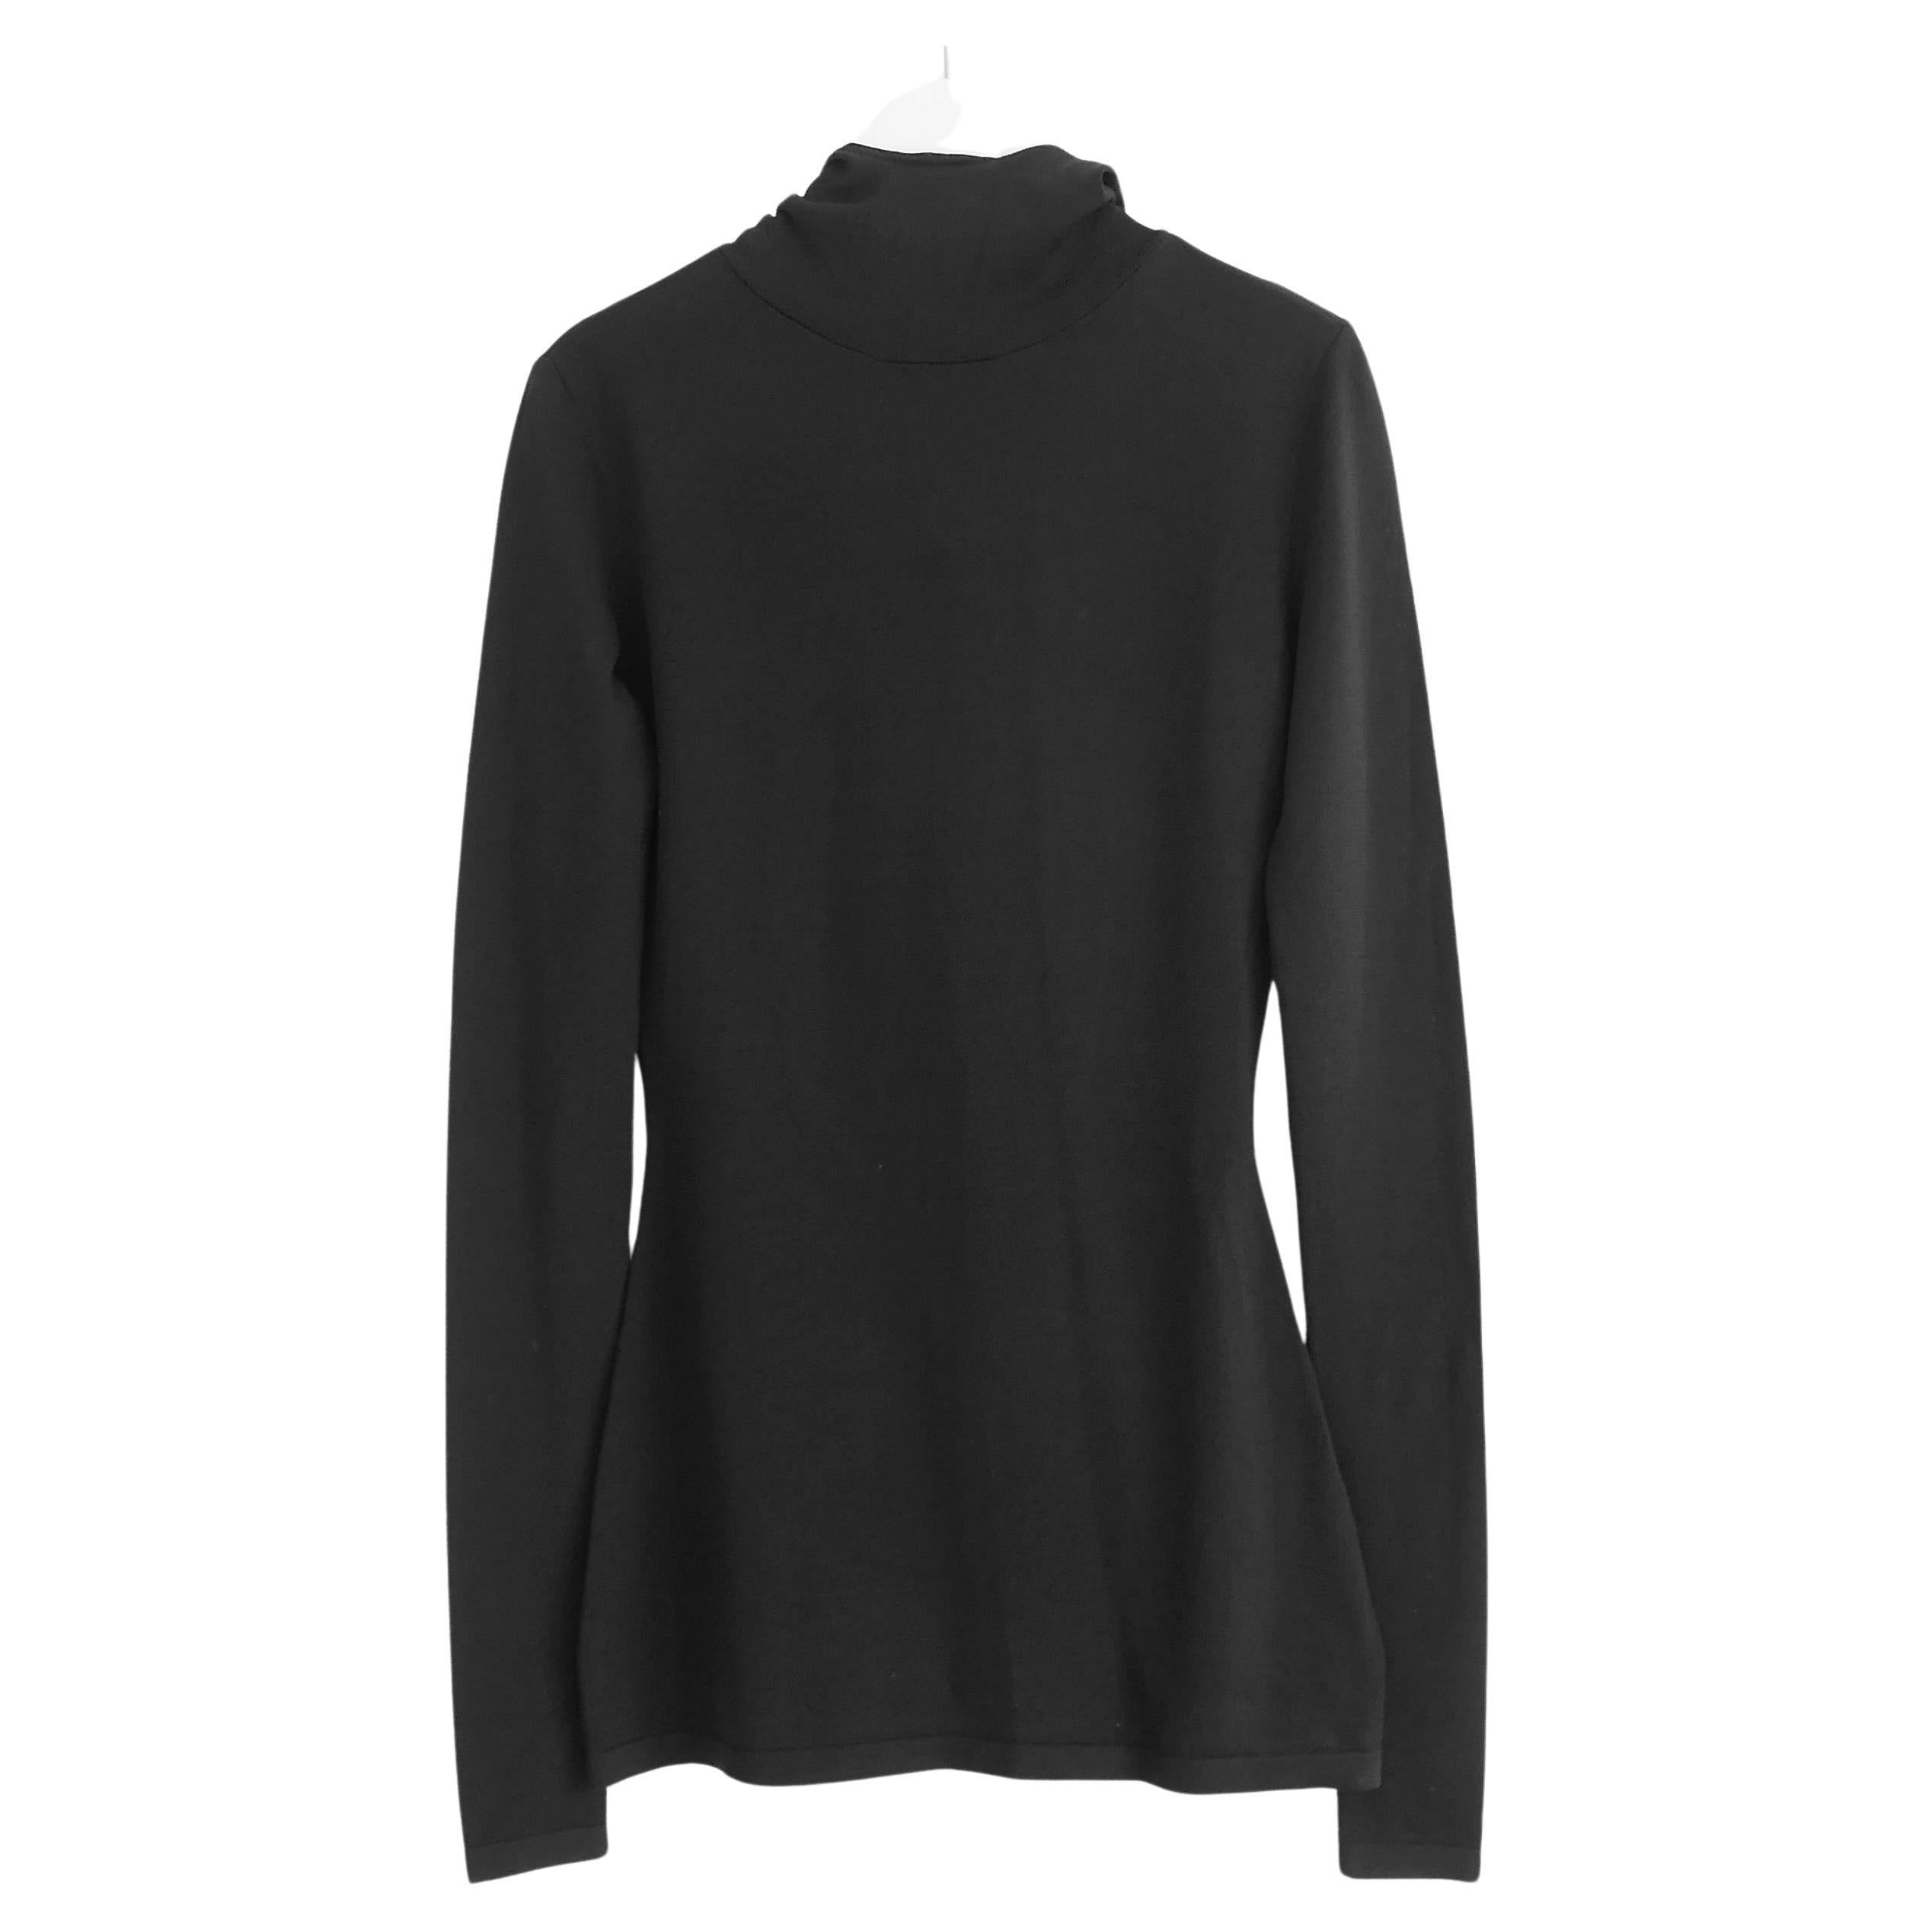  Dion Lee Pinnacle Balaclava Hooded Knit Top For Sale